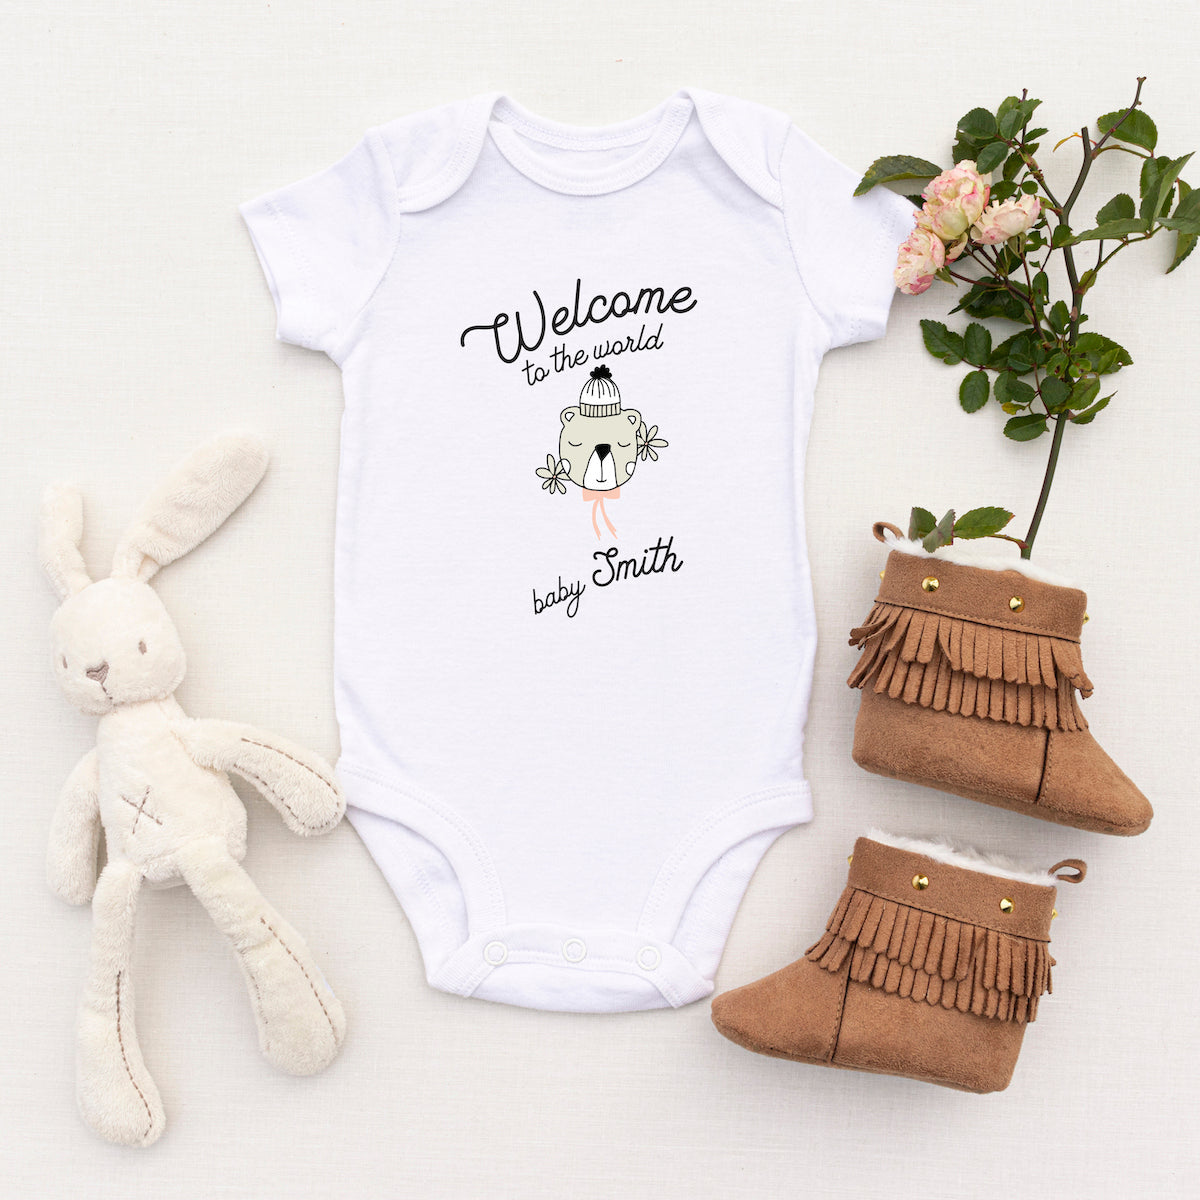 Personalised White Baby Body Suit Grow Vest - Cat